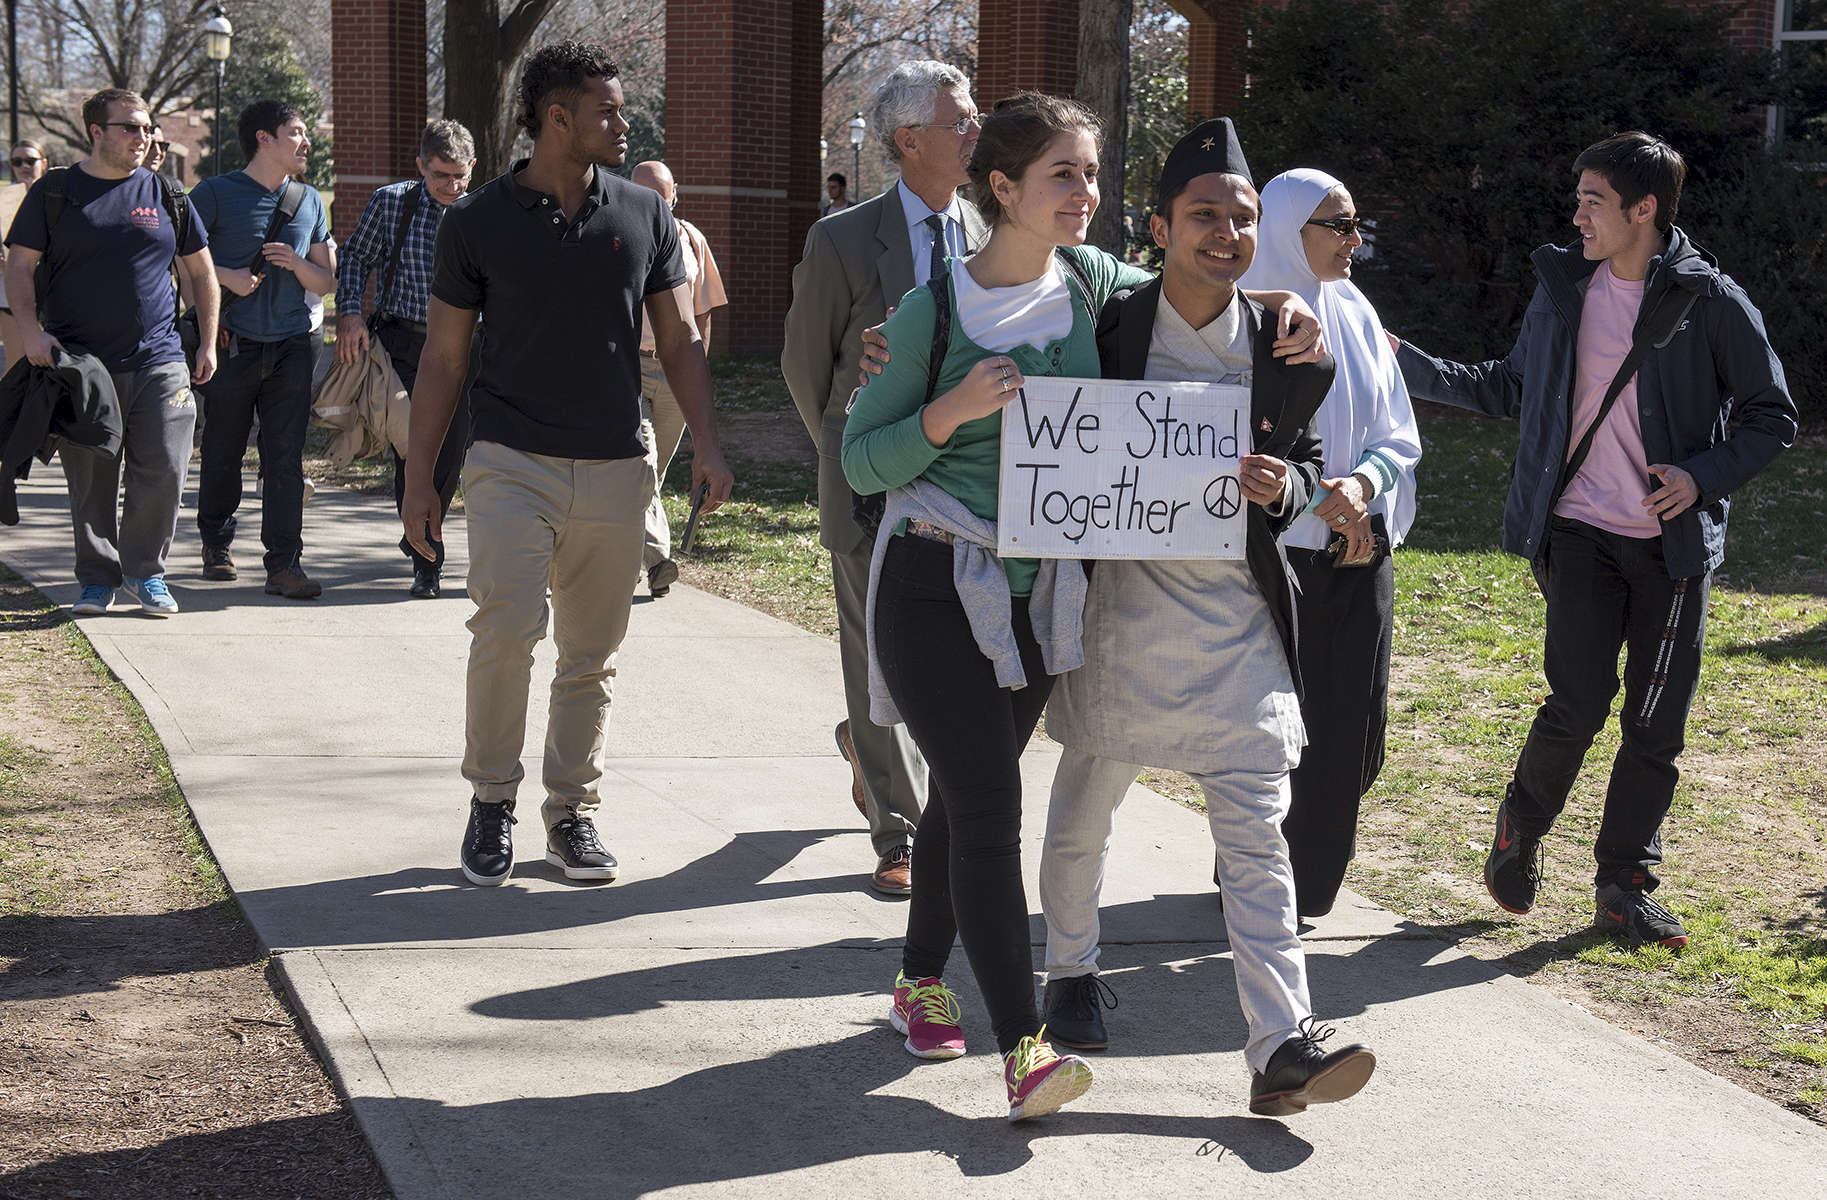 More than 100 students, faculty and staff gathered at Elon’s Speakers' Corner on Young Commons to share their concerns and hold a march addressing the president’s recent Executive Order regarding immigration.